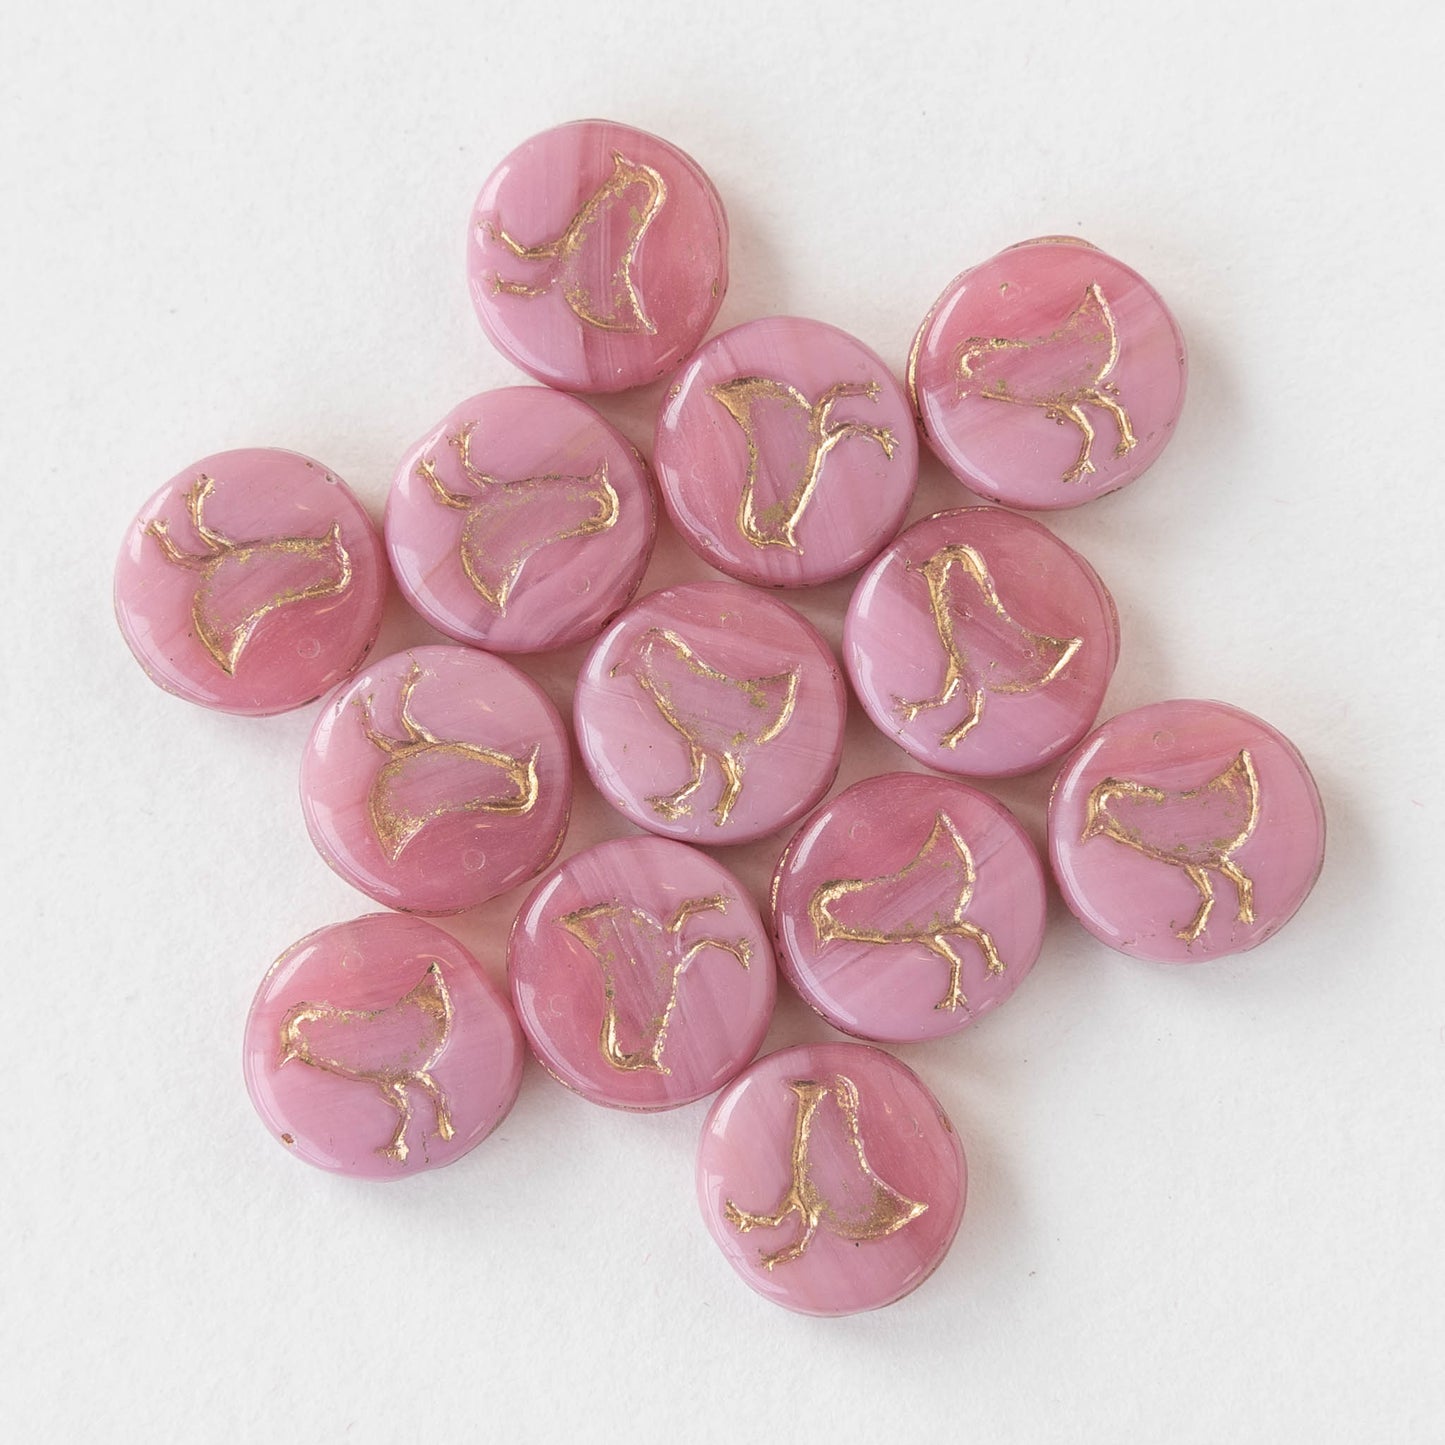 Load image into Gallery viewer, 12mm Bird Coin Beads - Pink Silk with Gold Wash - 15 beads
